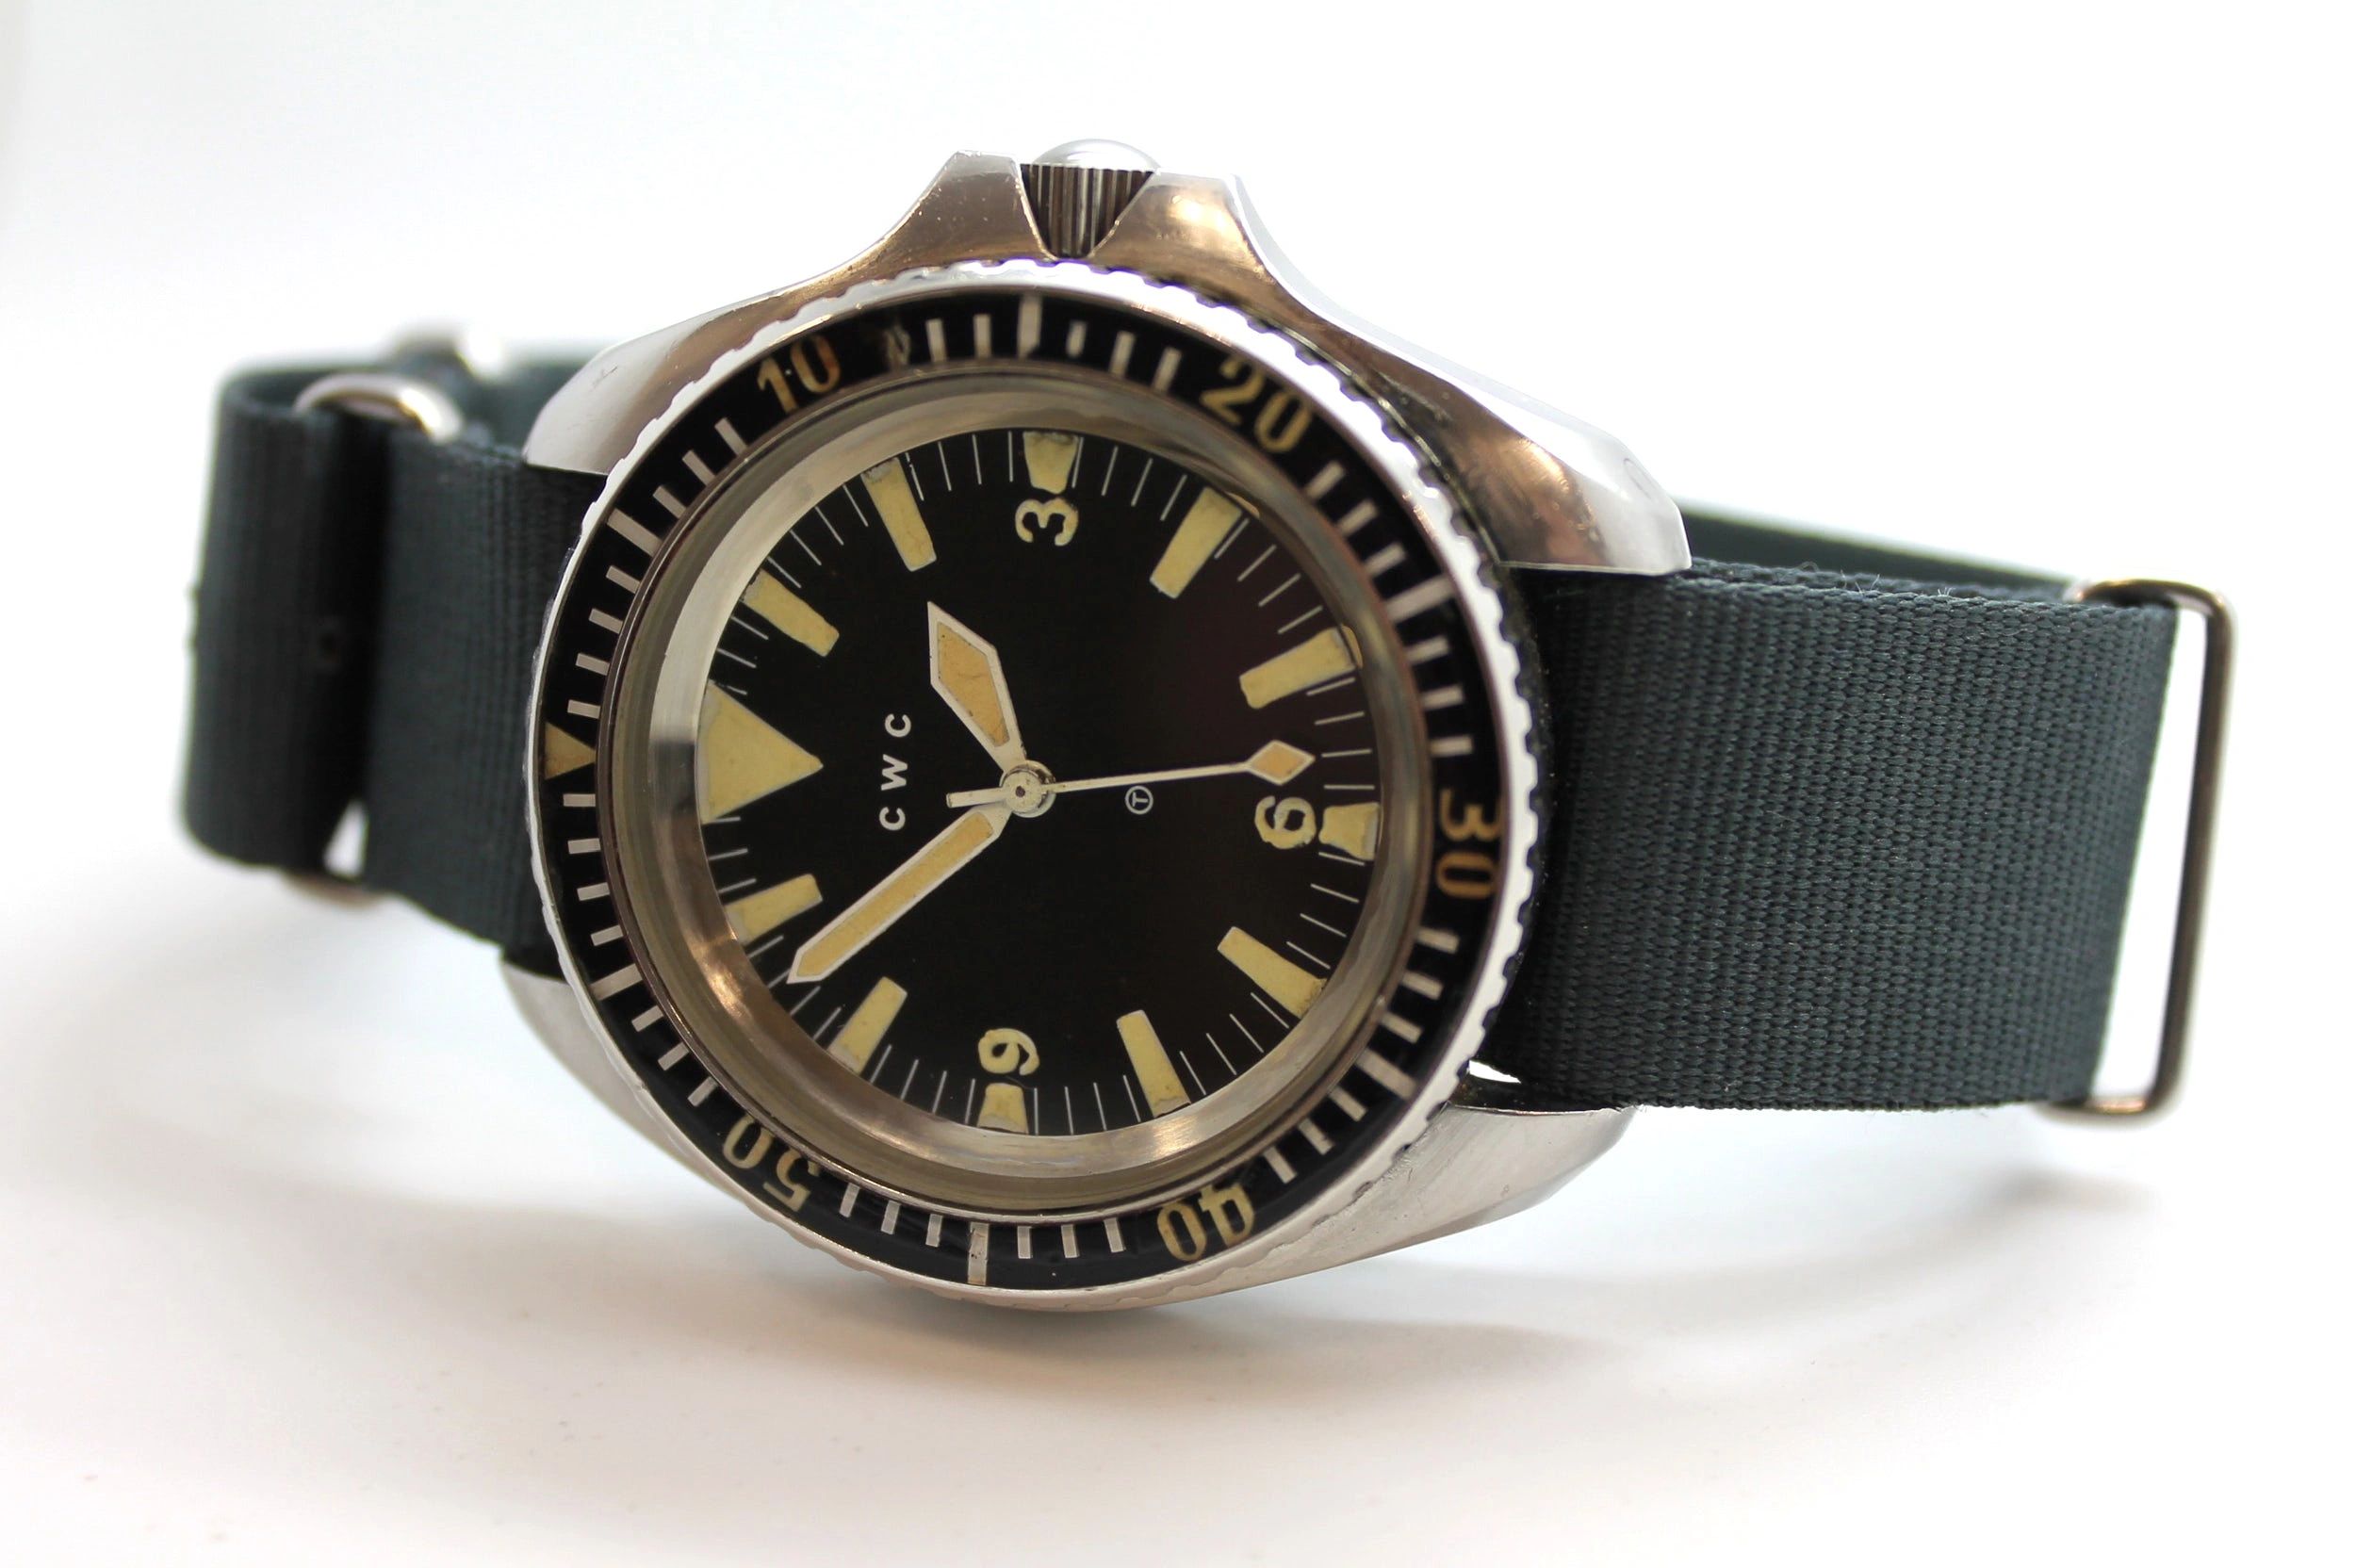 Did Dodane make watches for the British military? Yes and no…